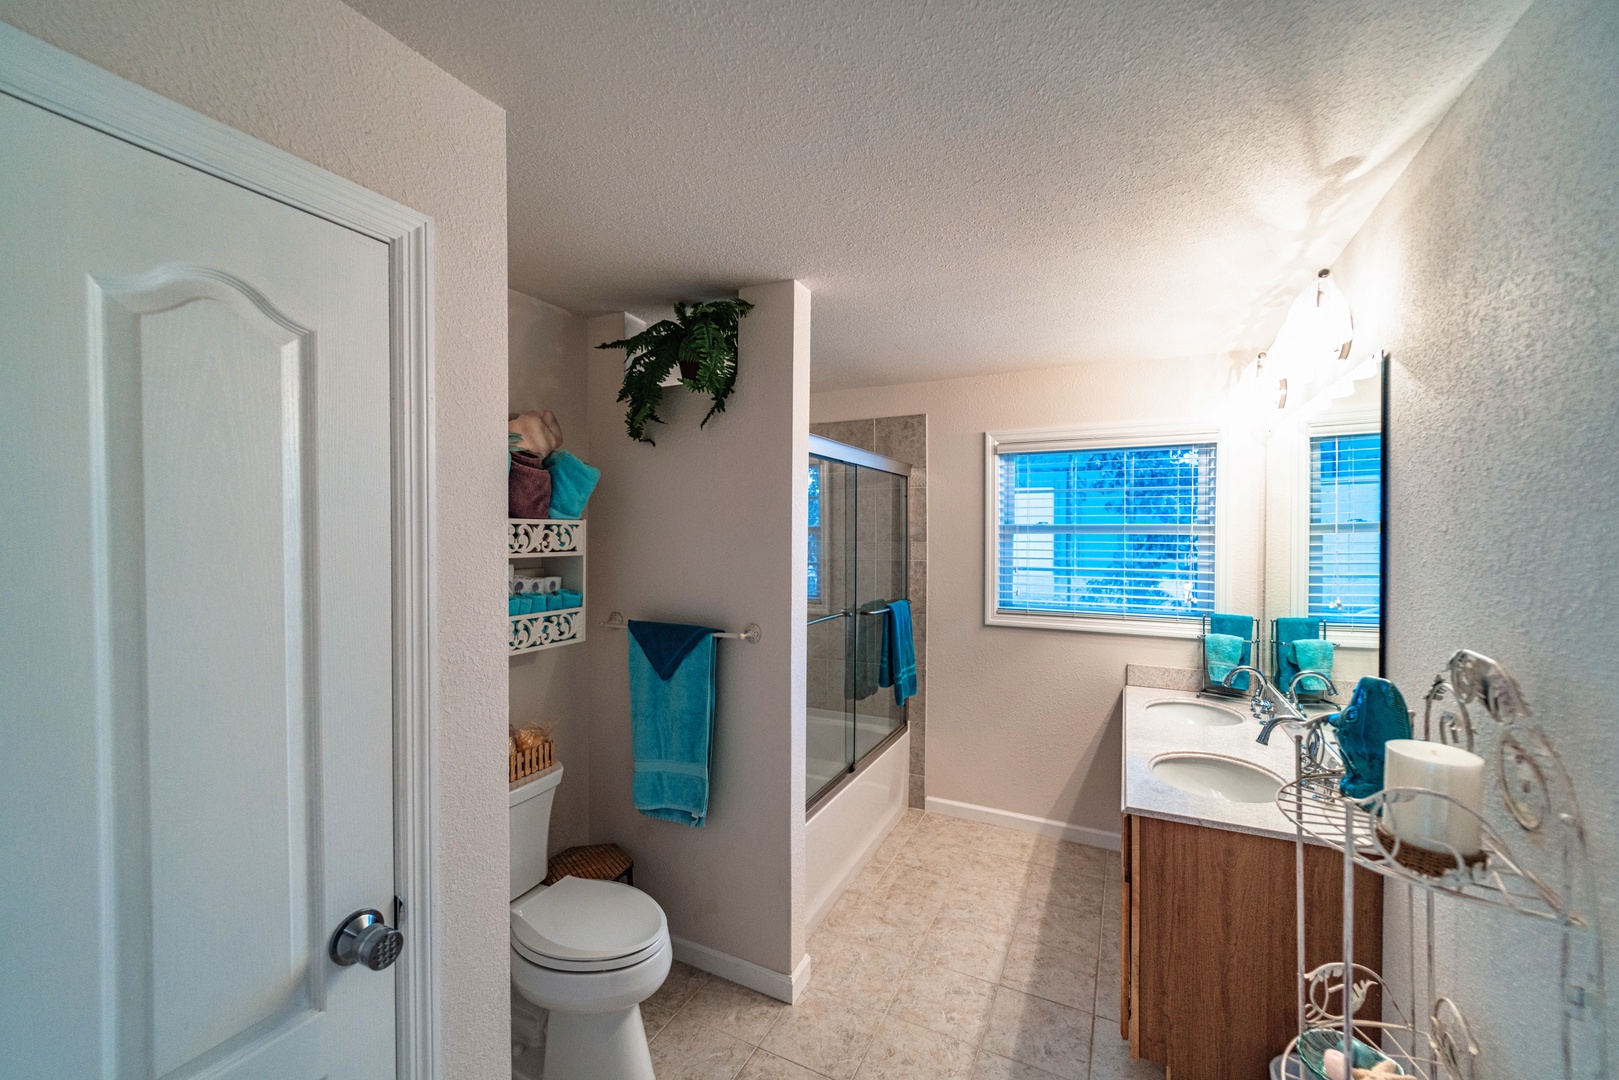 The upper level full bathroom offers a double vanity & shower/tub combo